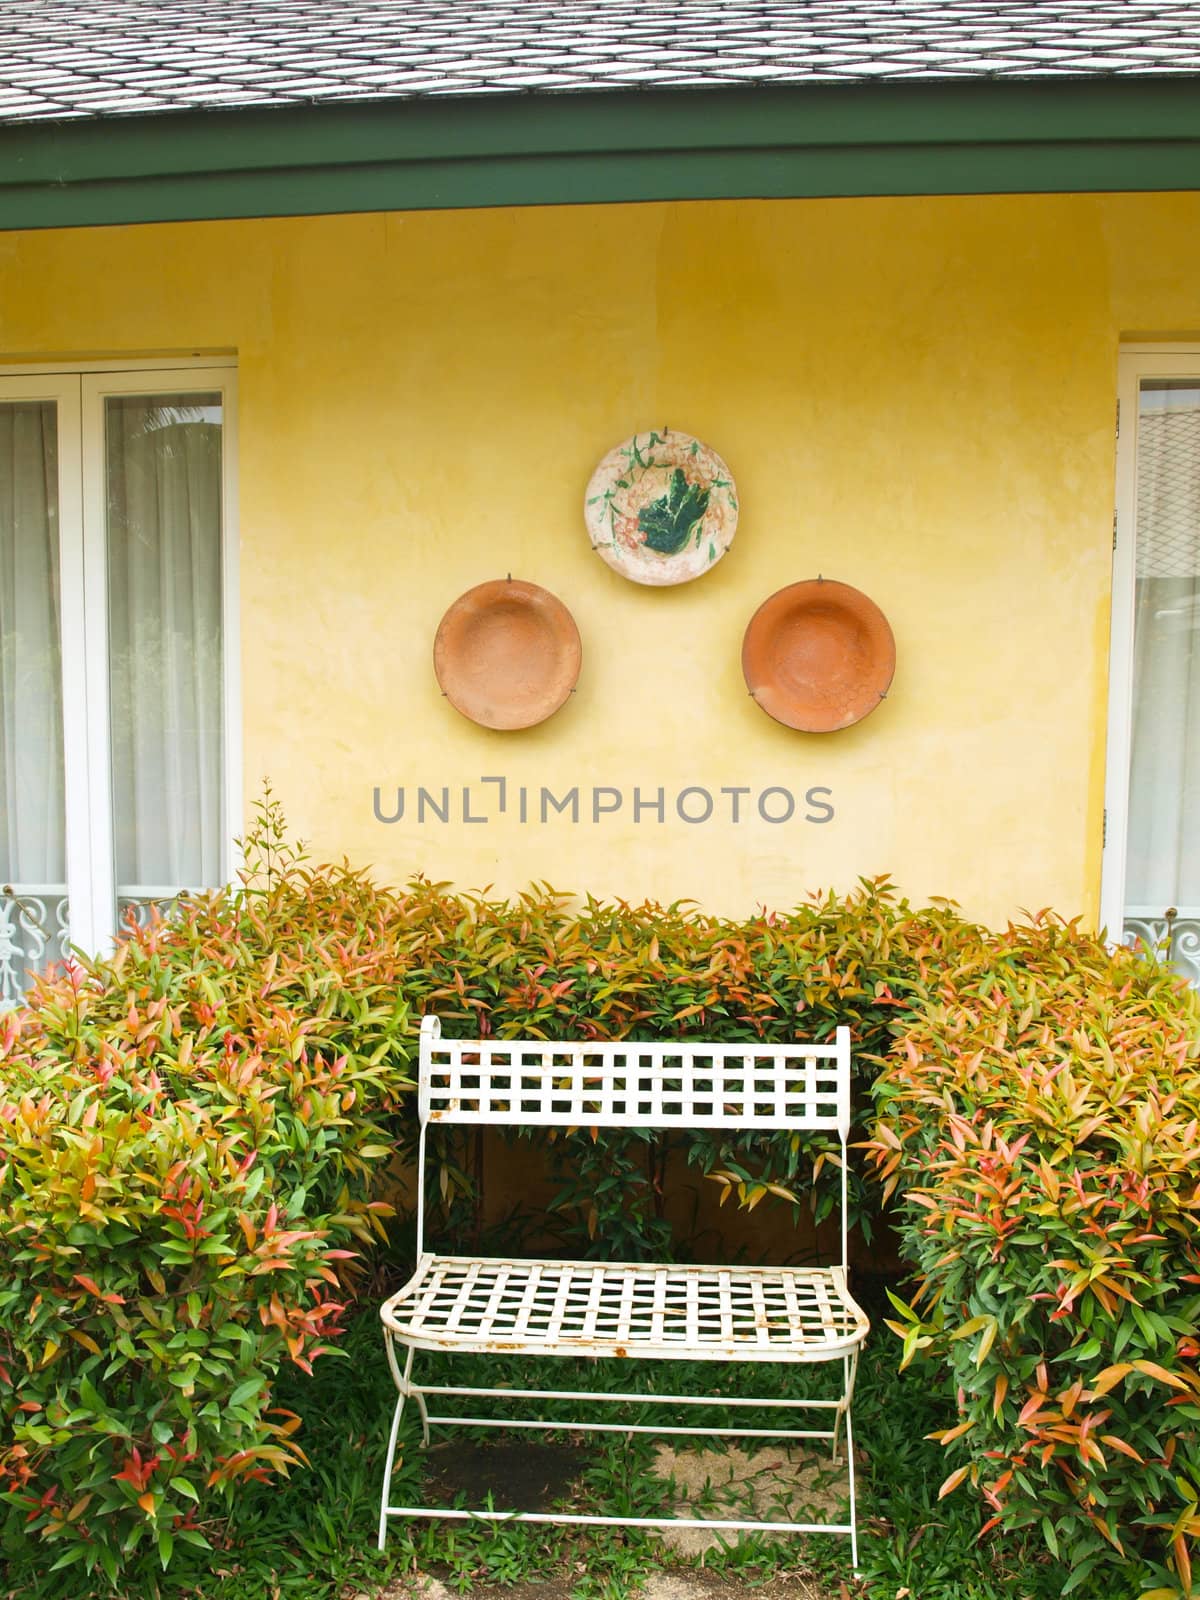 A metal bench in a garden on yellow wall background by gururugu